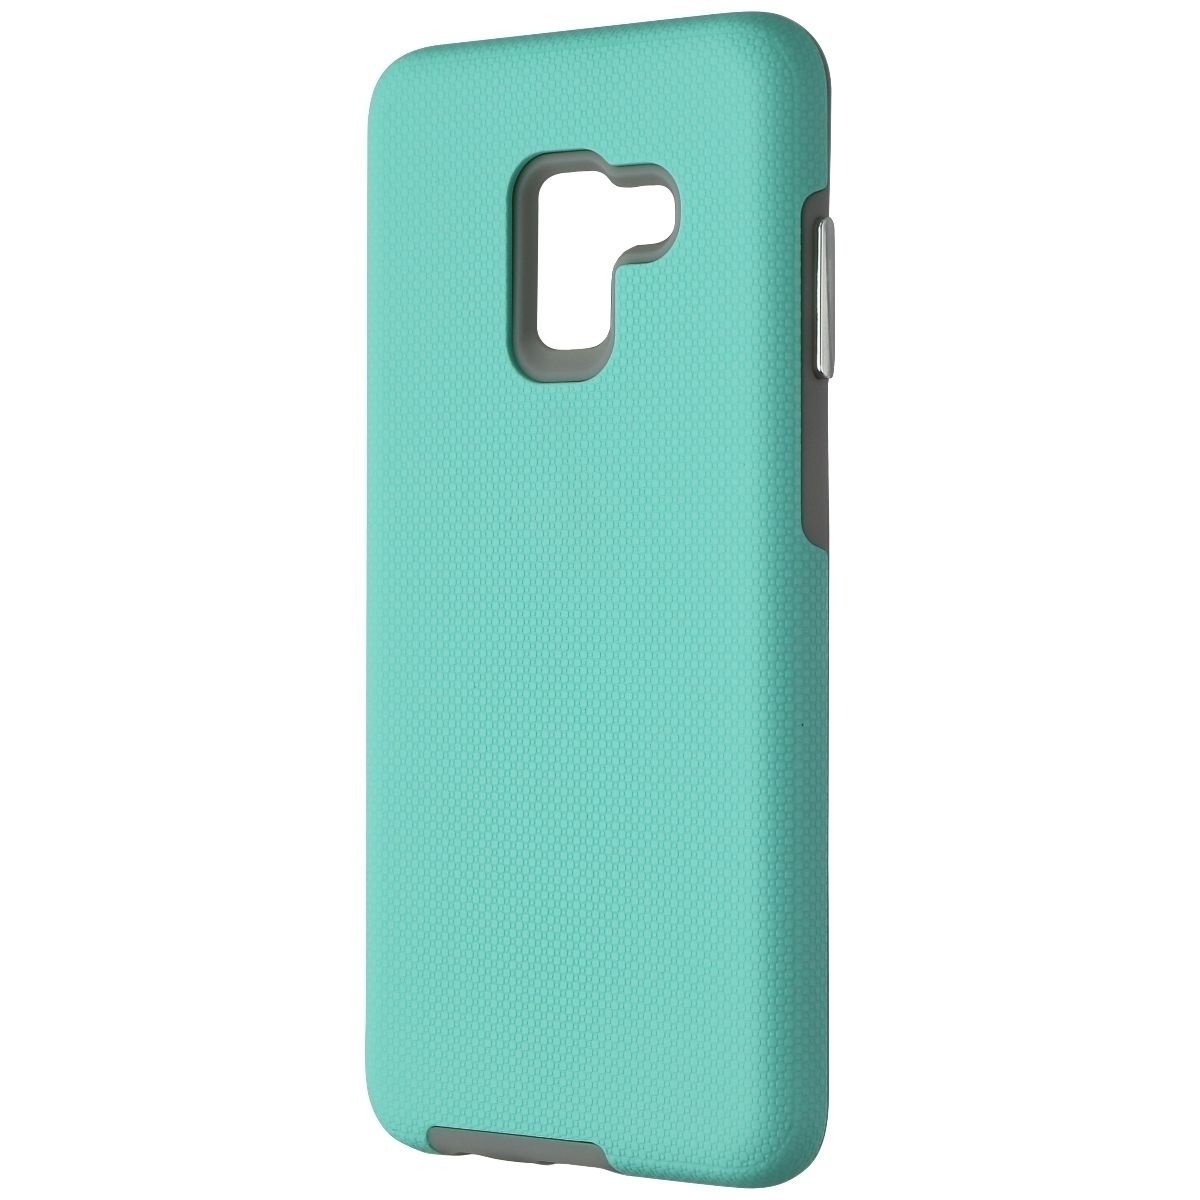 Xqisit Protective Cover For Samsung Galaxy A8 (2018) Smartphone - Teal/Gray